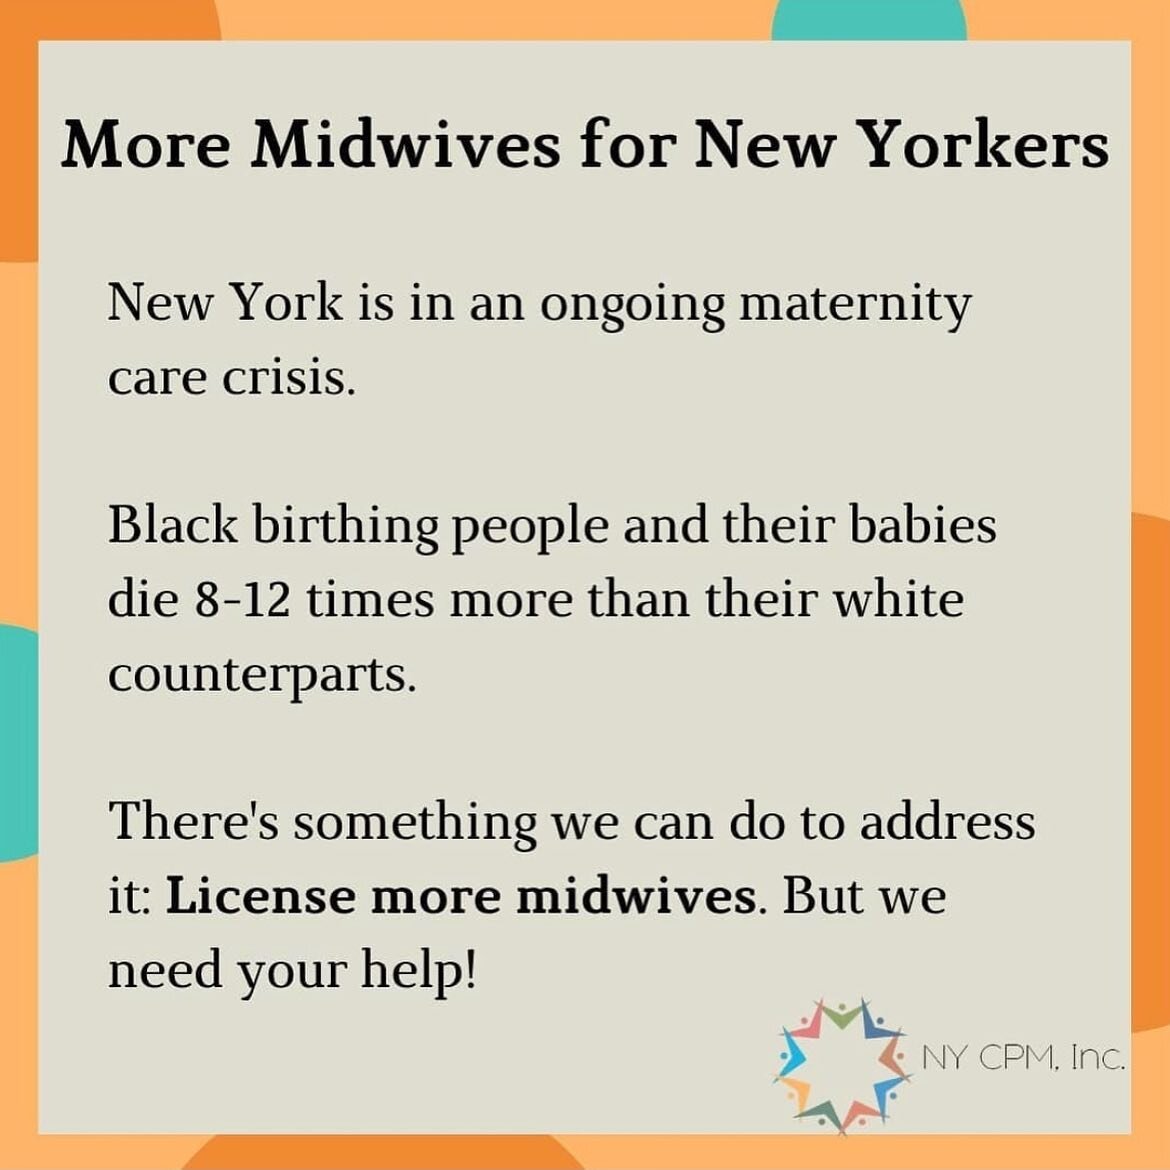 NYC needs more options for birthing people that centers birthing people. Swipe right in this post for multiple action steps. Add your voice to those who want to see the landscape of birthing options in NYC change for the better. @nycpm.inc